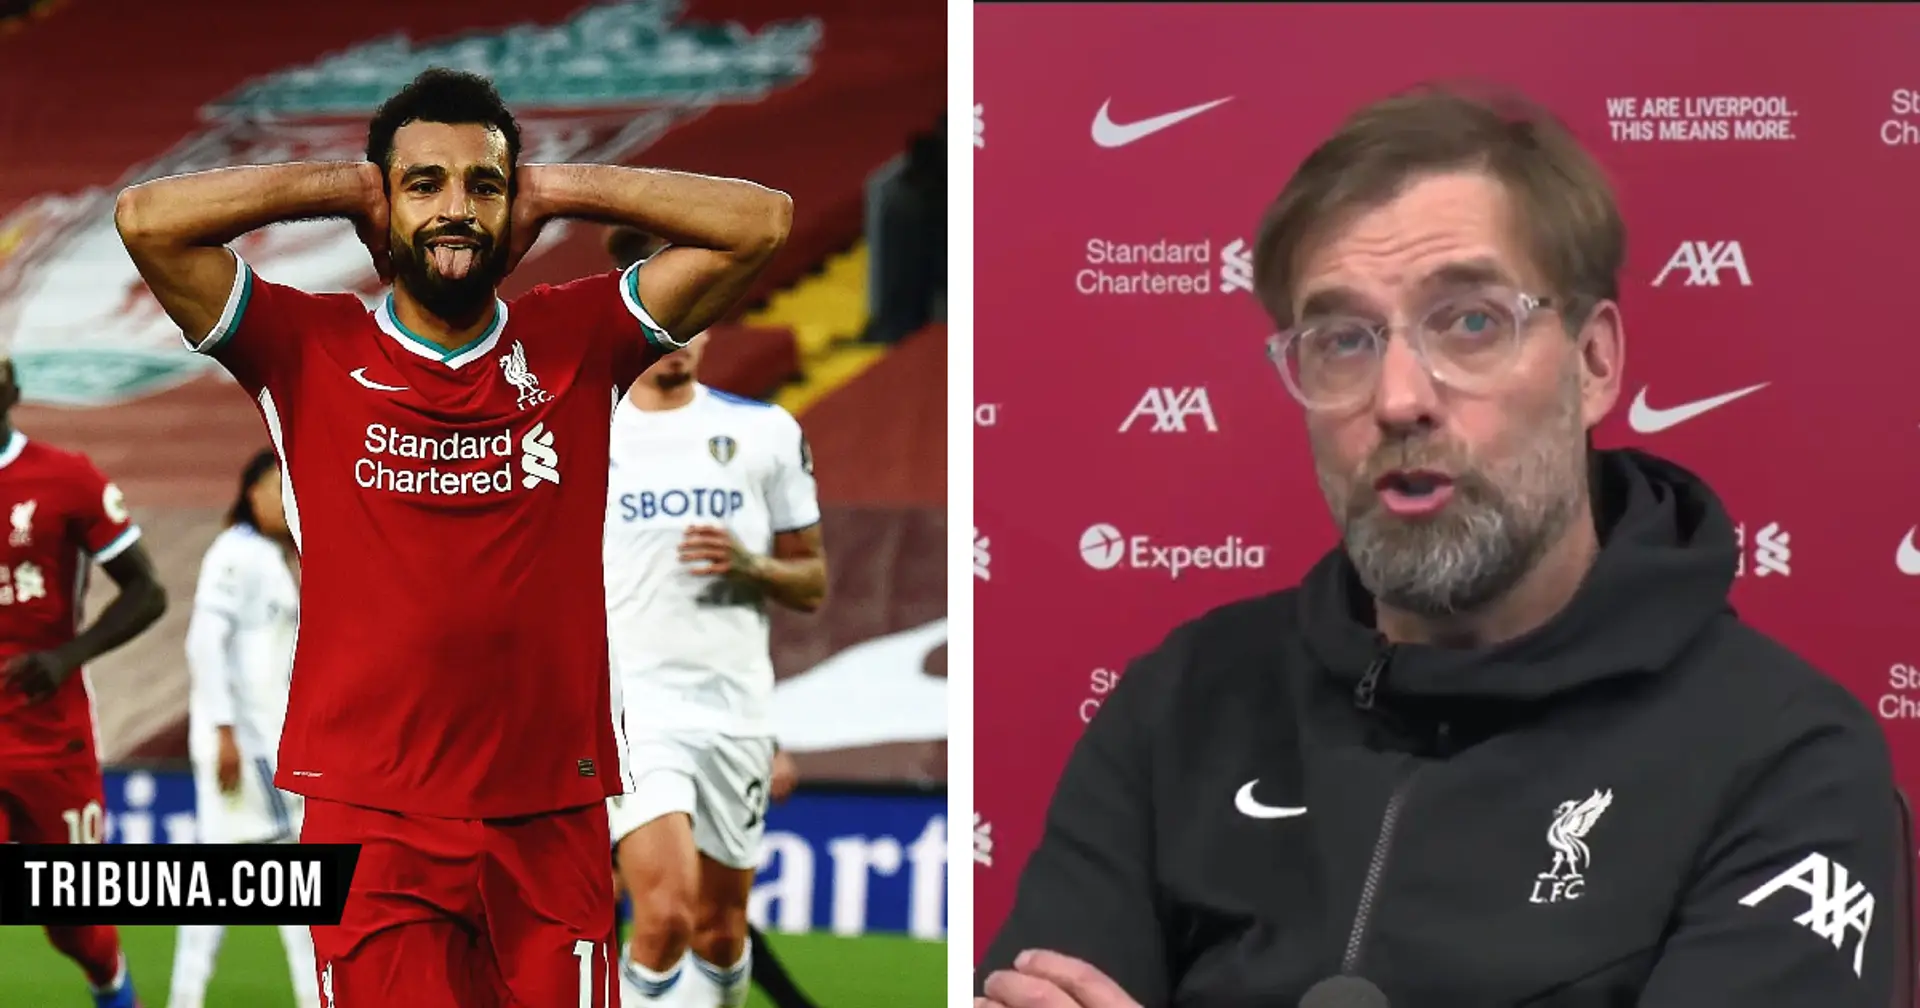 Klopp: 'If you don't give Salah the right amount of respect, you have to ask yourself why'